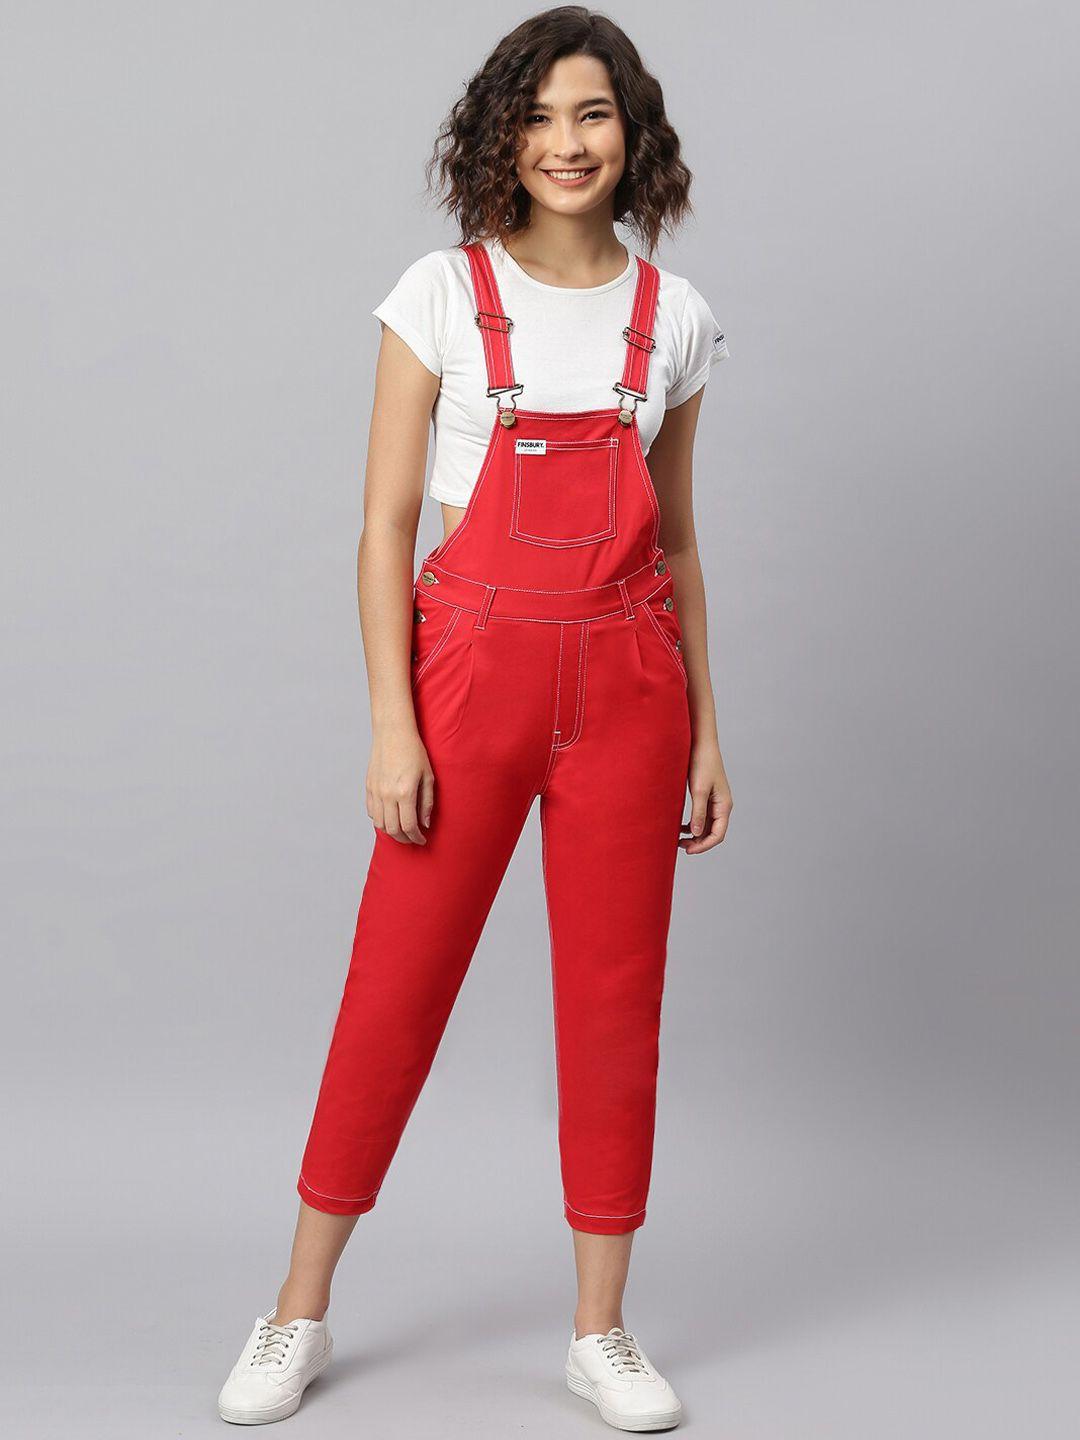 finsbury-london-women-red-solid-cotton-straight-leg-dungarees